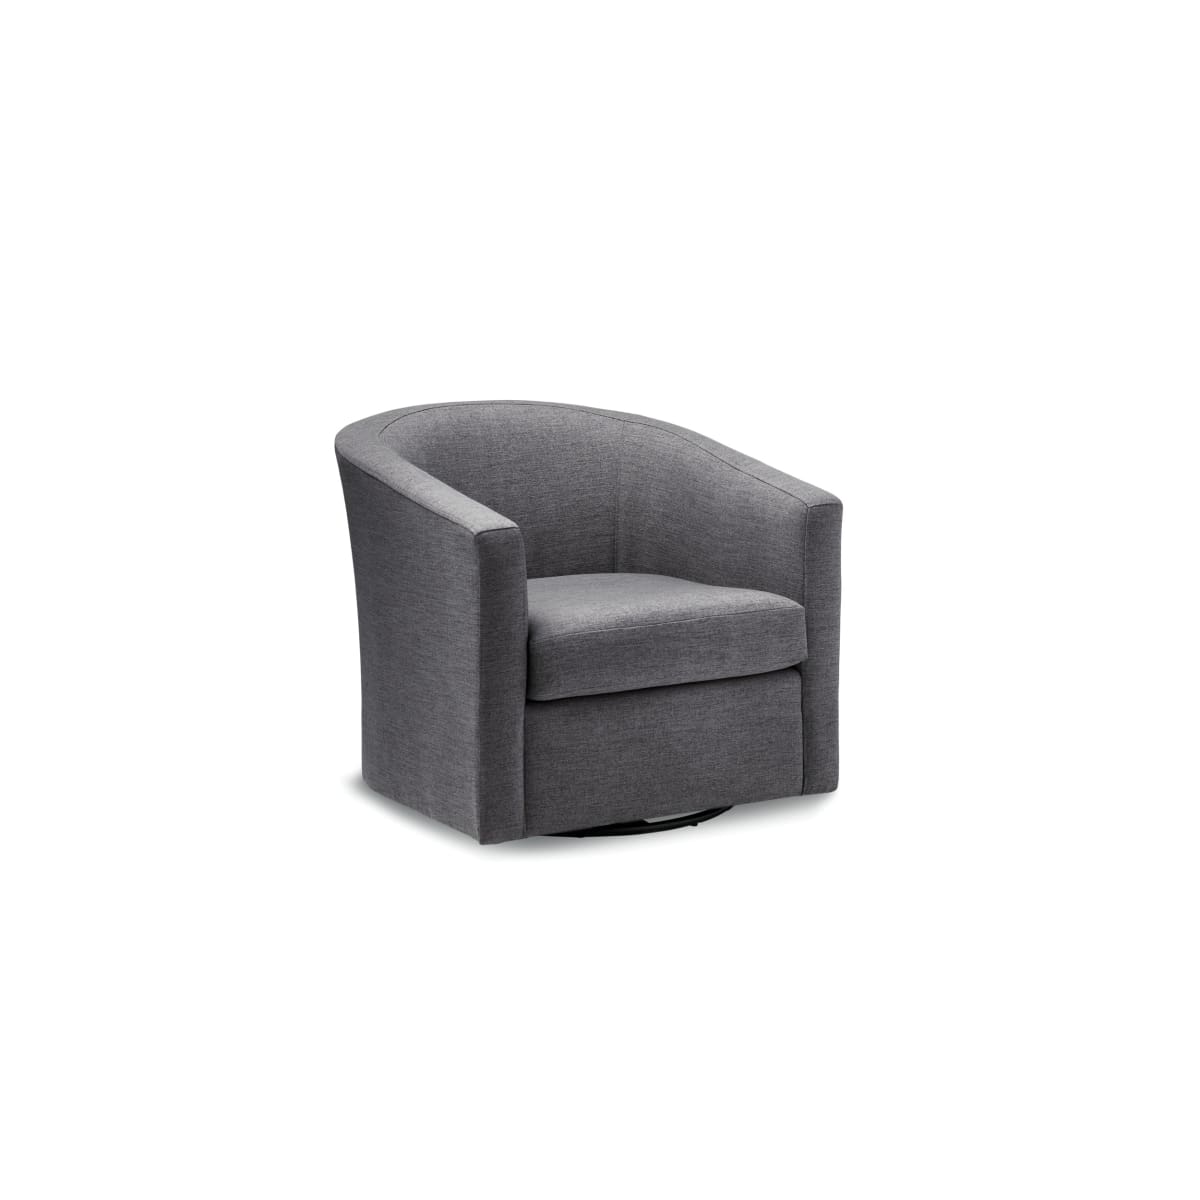 Leila Swivel Accent Chair - 30x33x31 - accent chairs